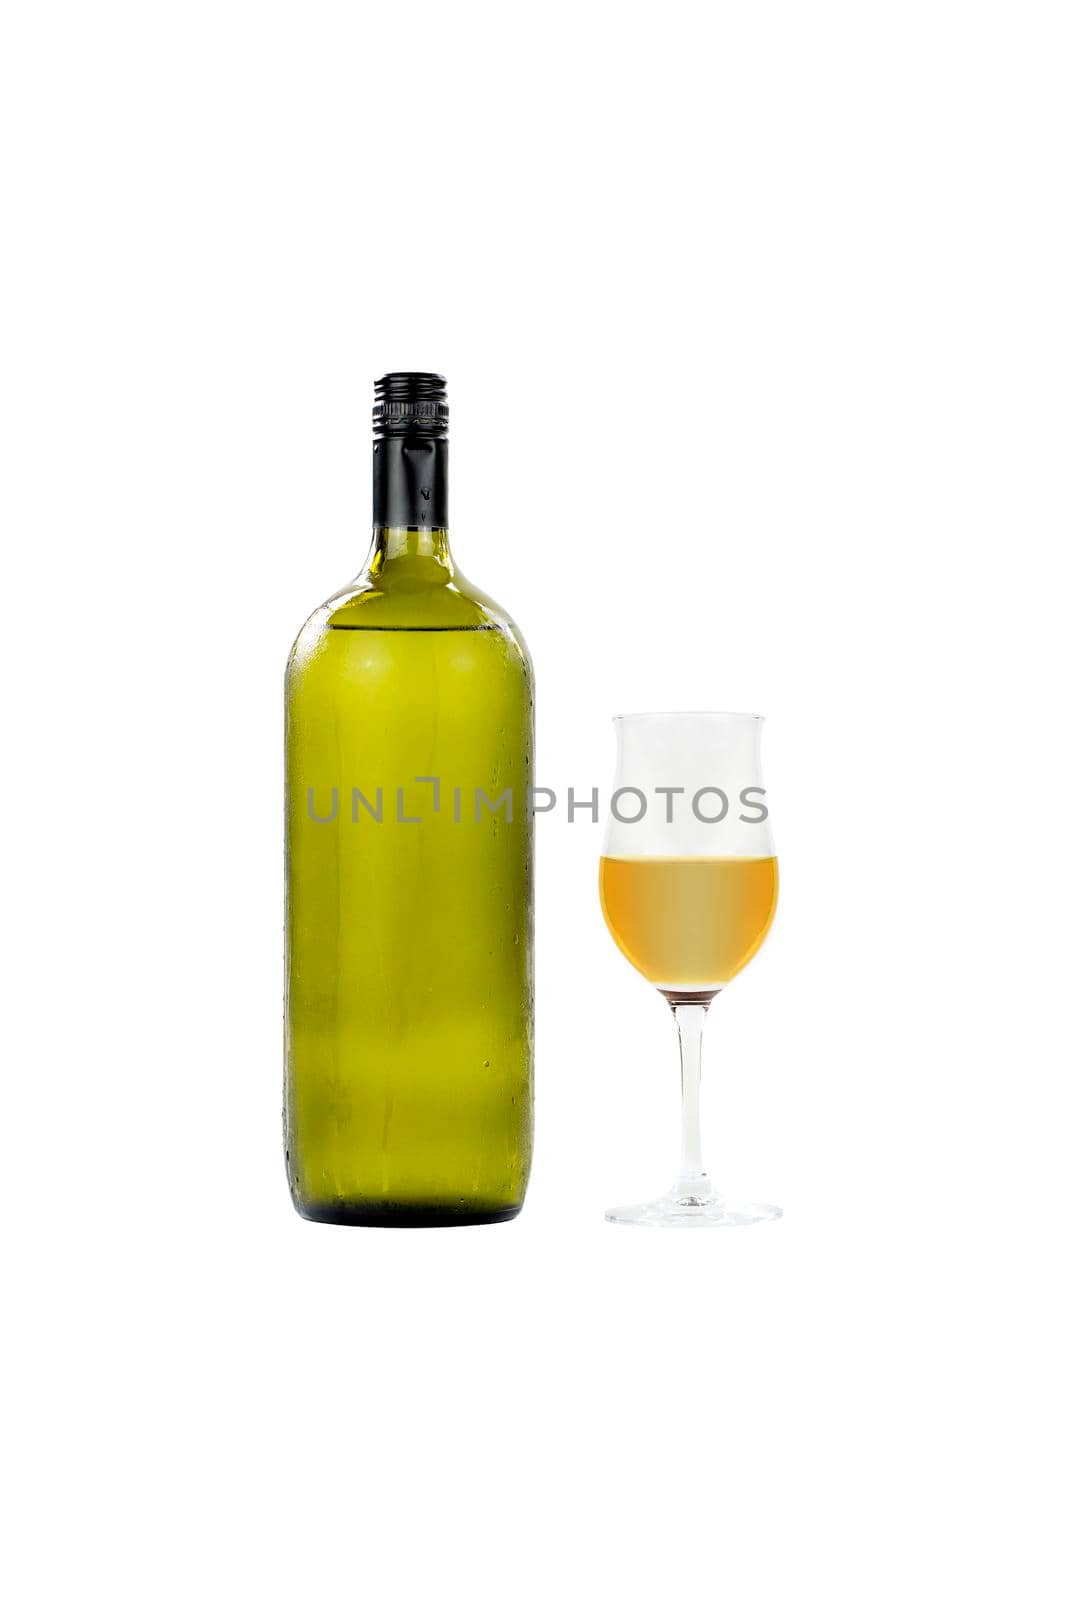 Large glass wine bottle and wine glass isolated on white background. by wattanaphob